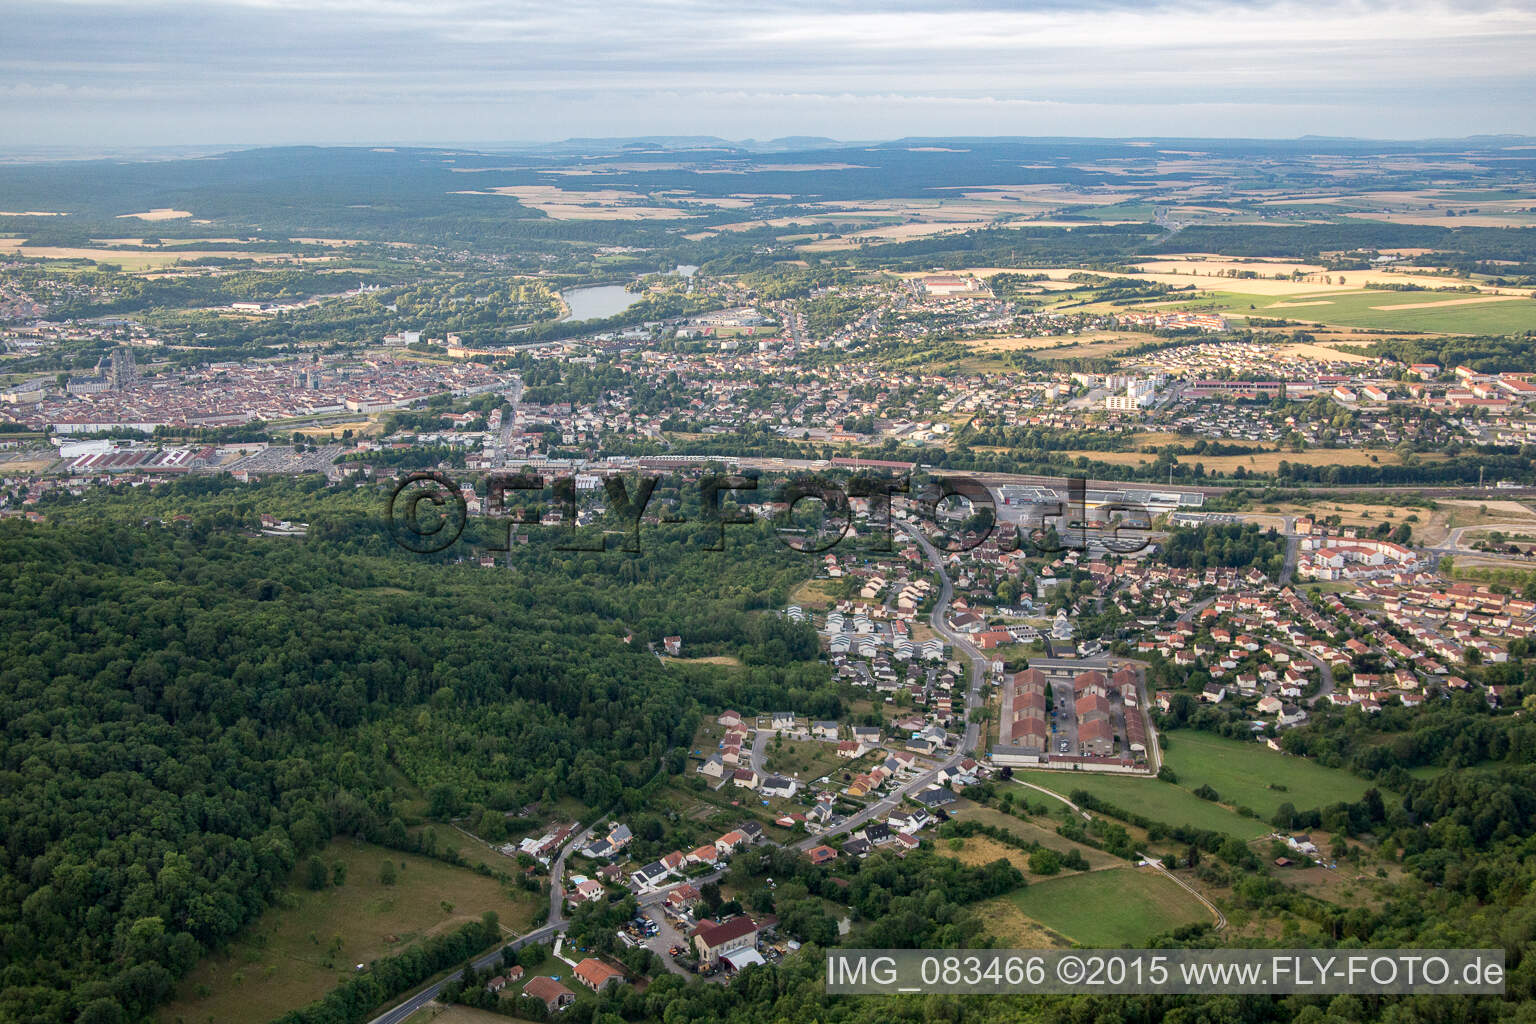 Aerial view of Écrouves in the state Meurthe et Moselle, France